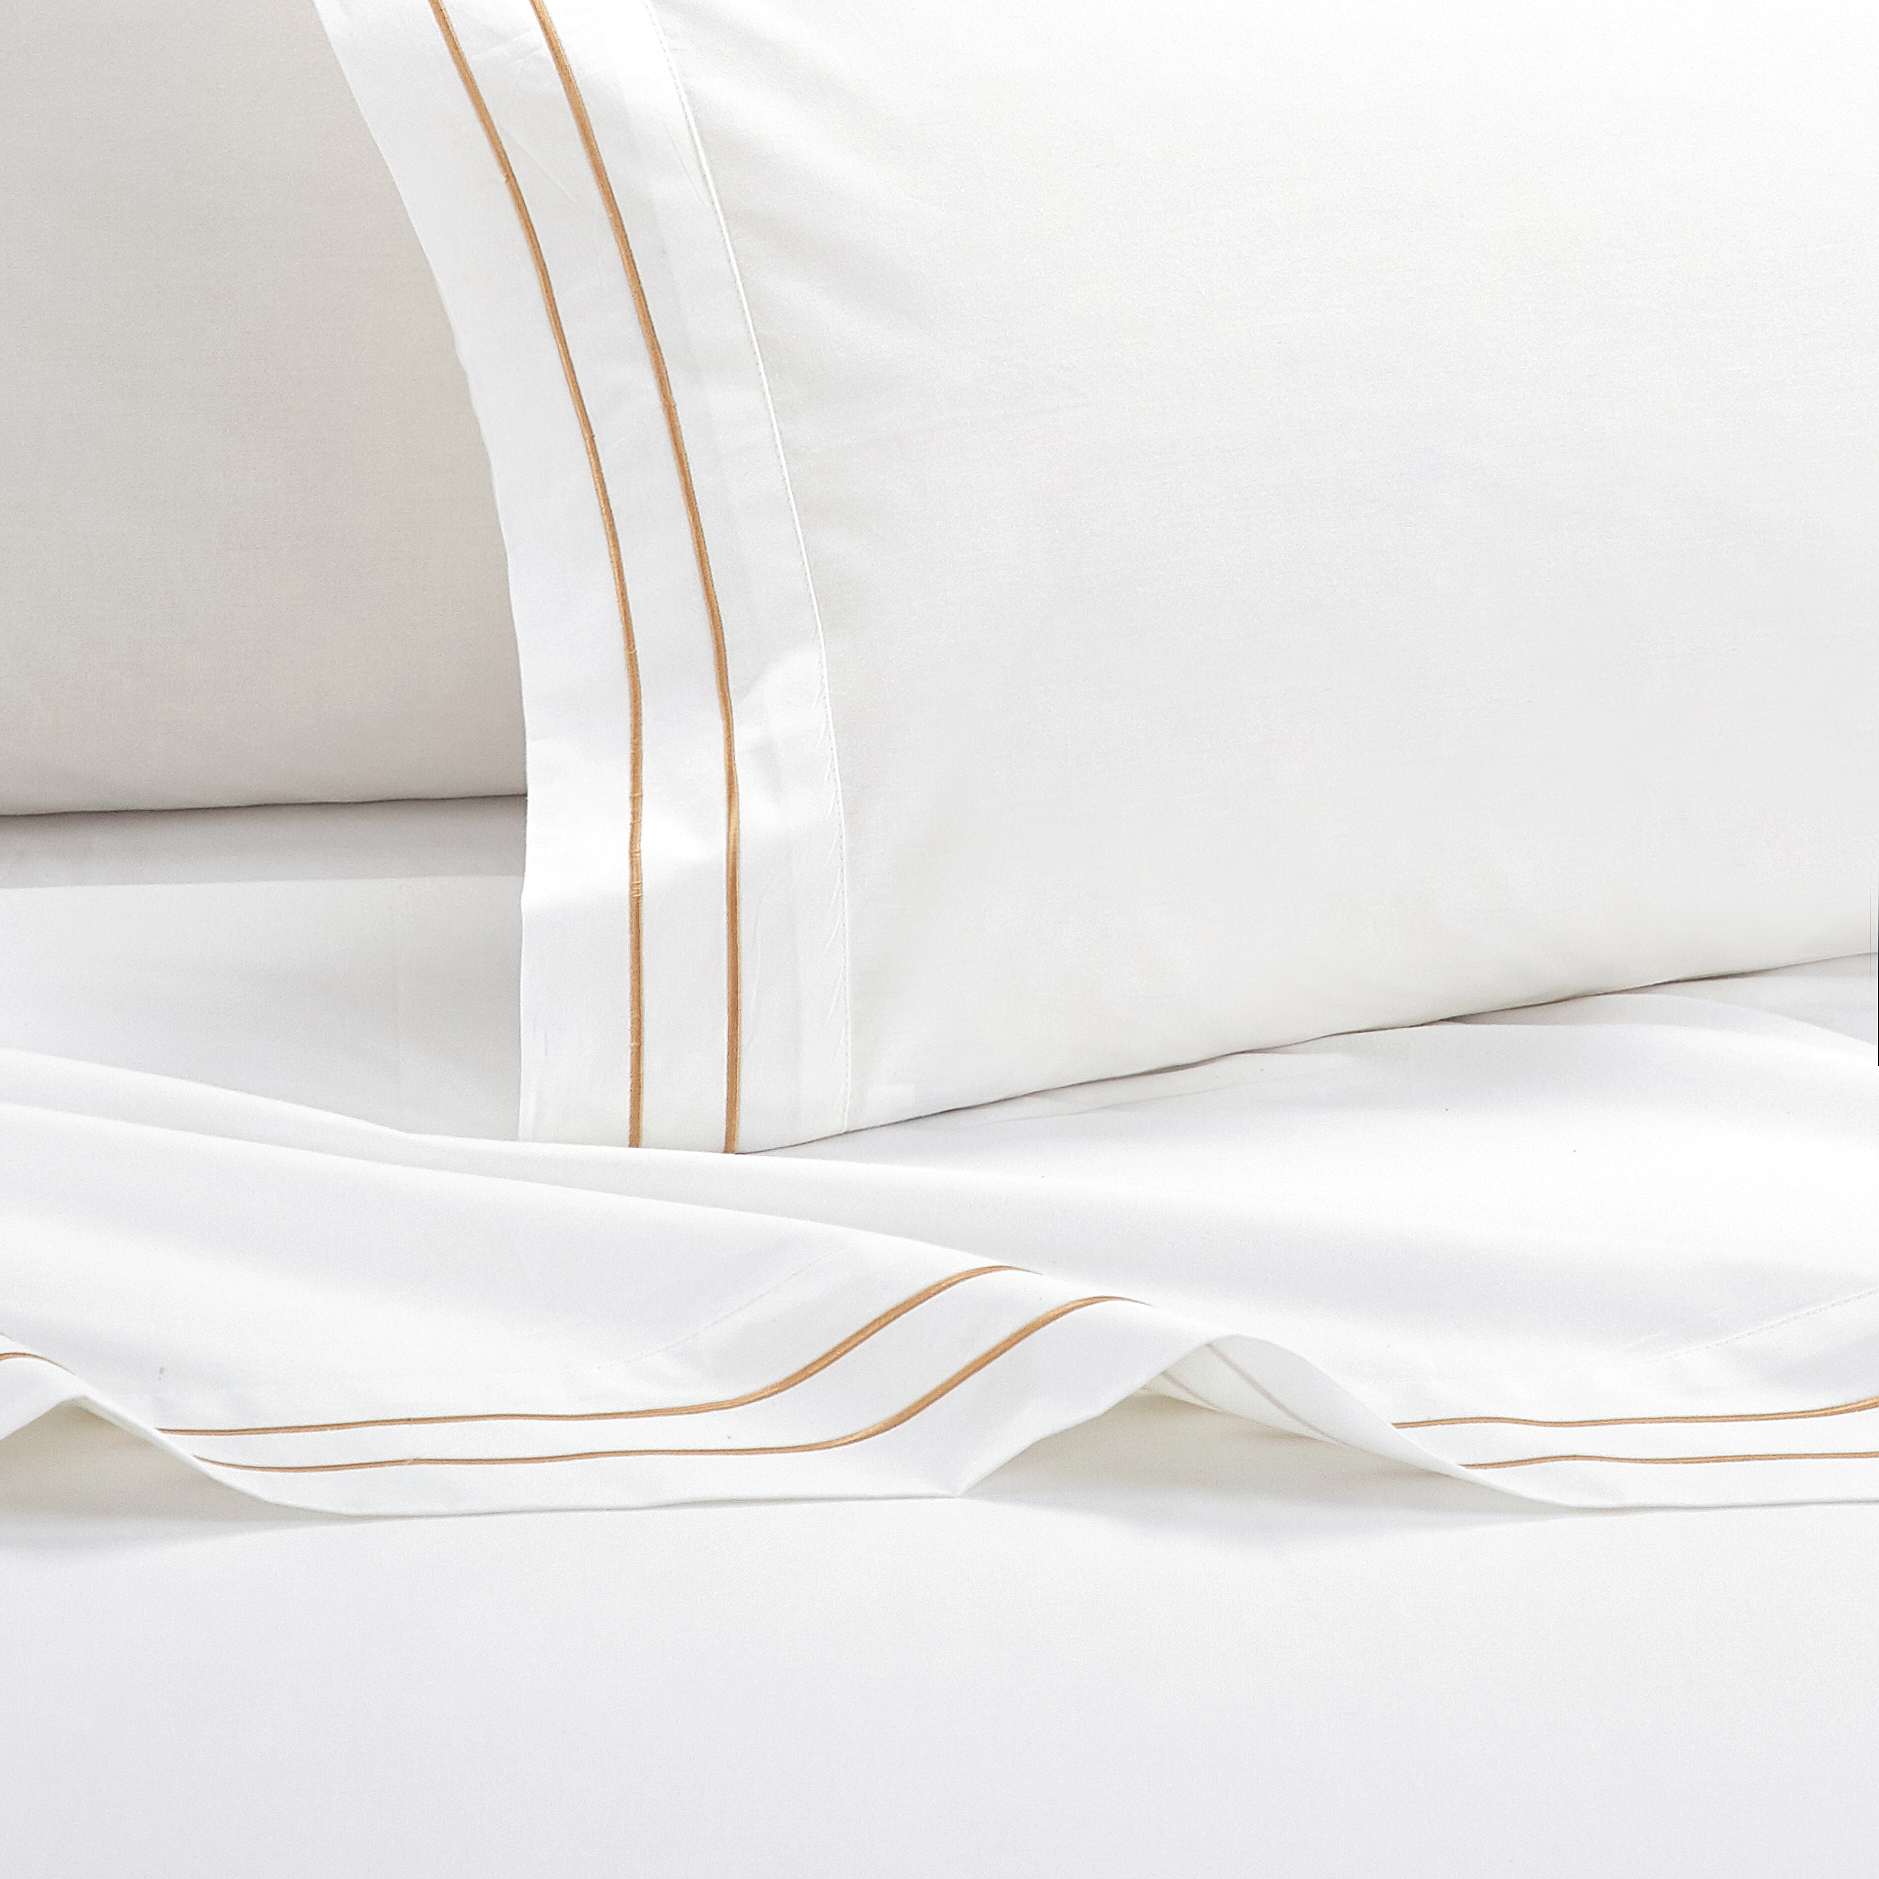 Balensia 4 Piece Organic Cotton Sheet Set Solid White With Dual Stripe Embroidery - Gold, King